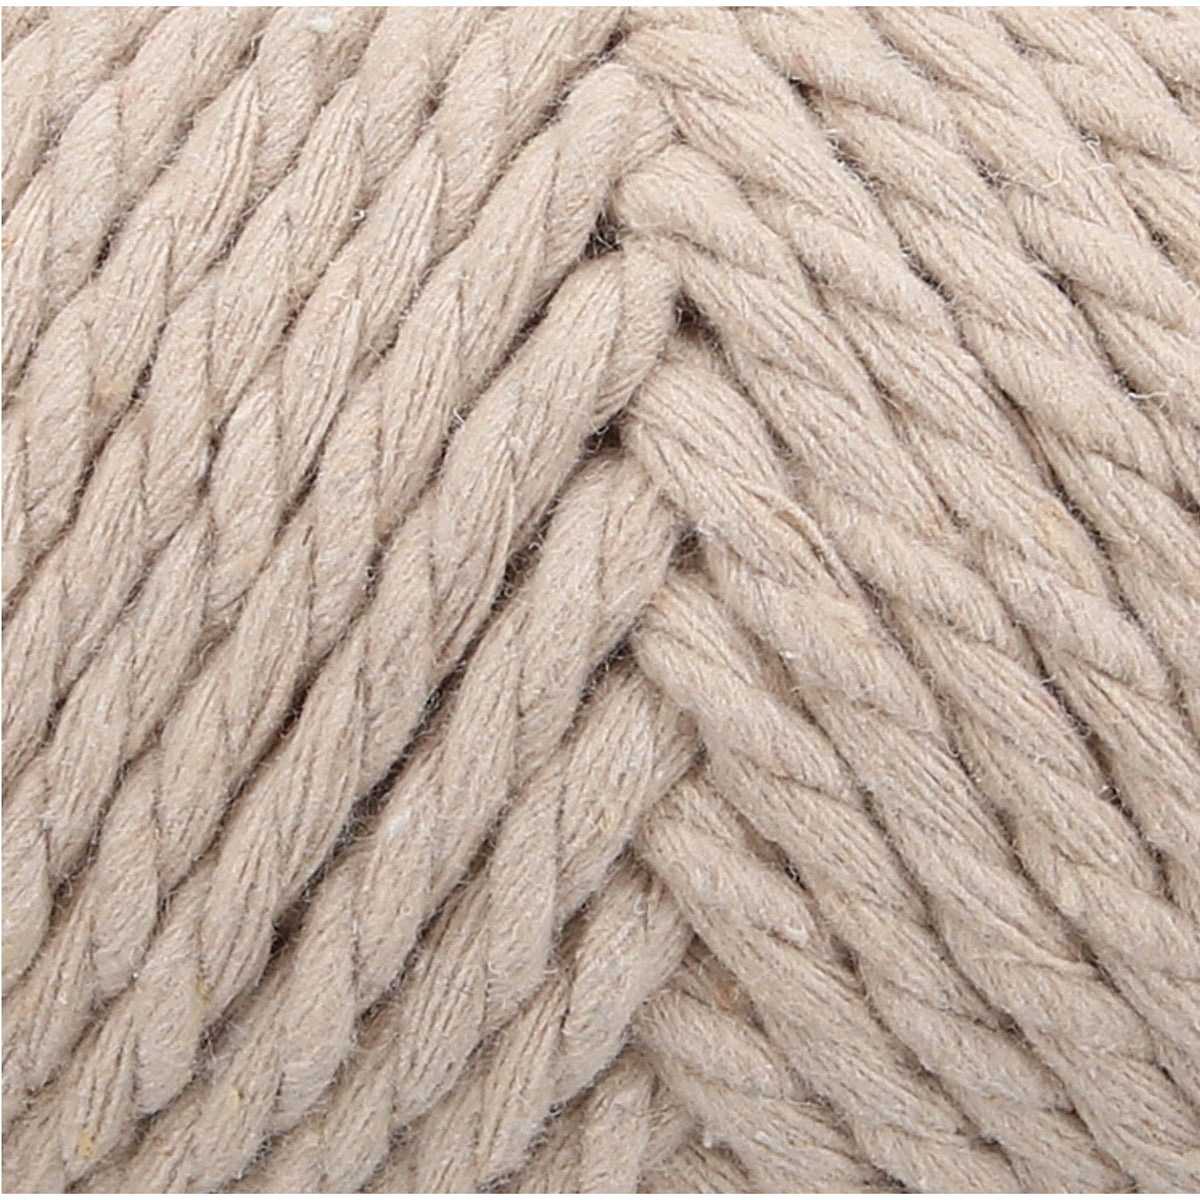 Anchor Crafty 5mm Macrame Recyled Cotton